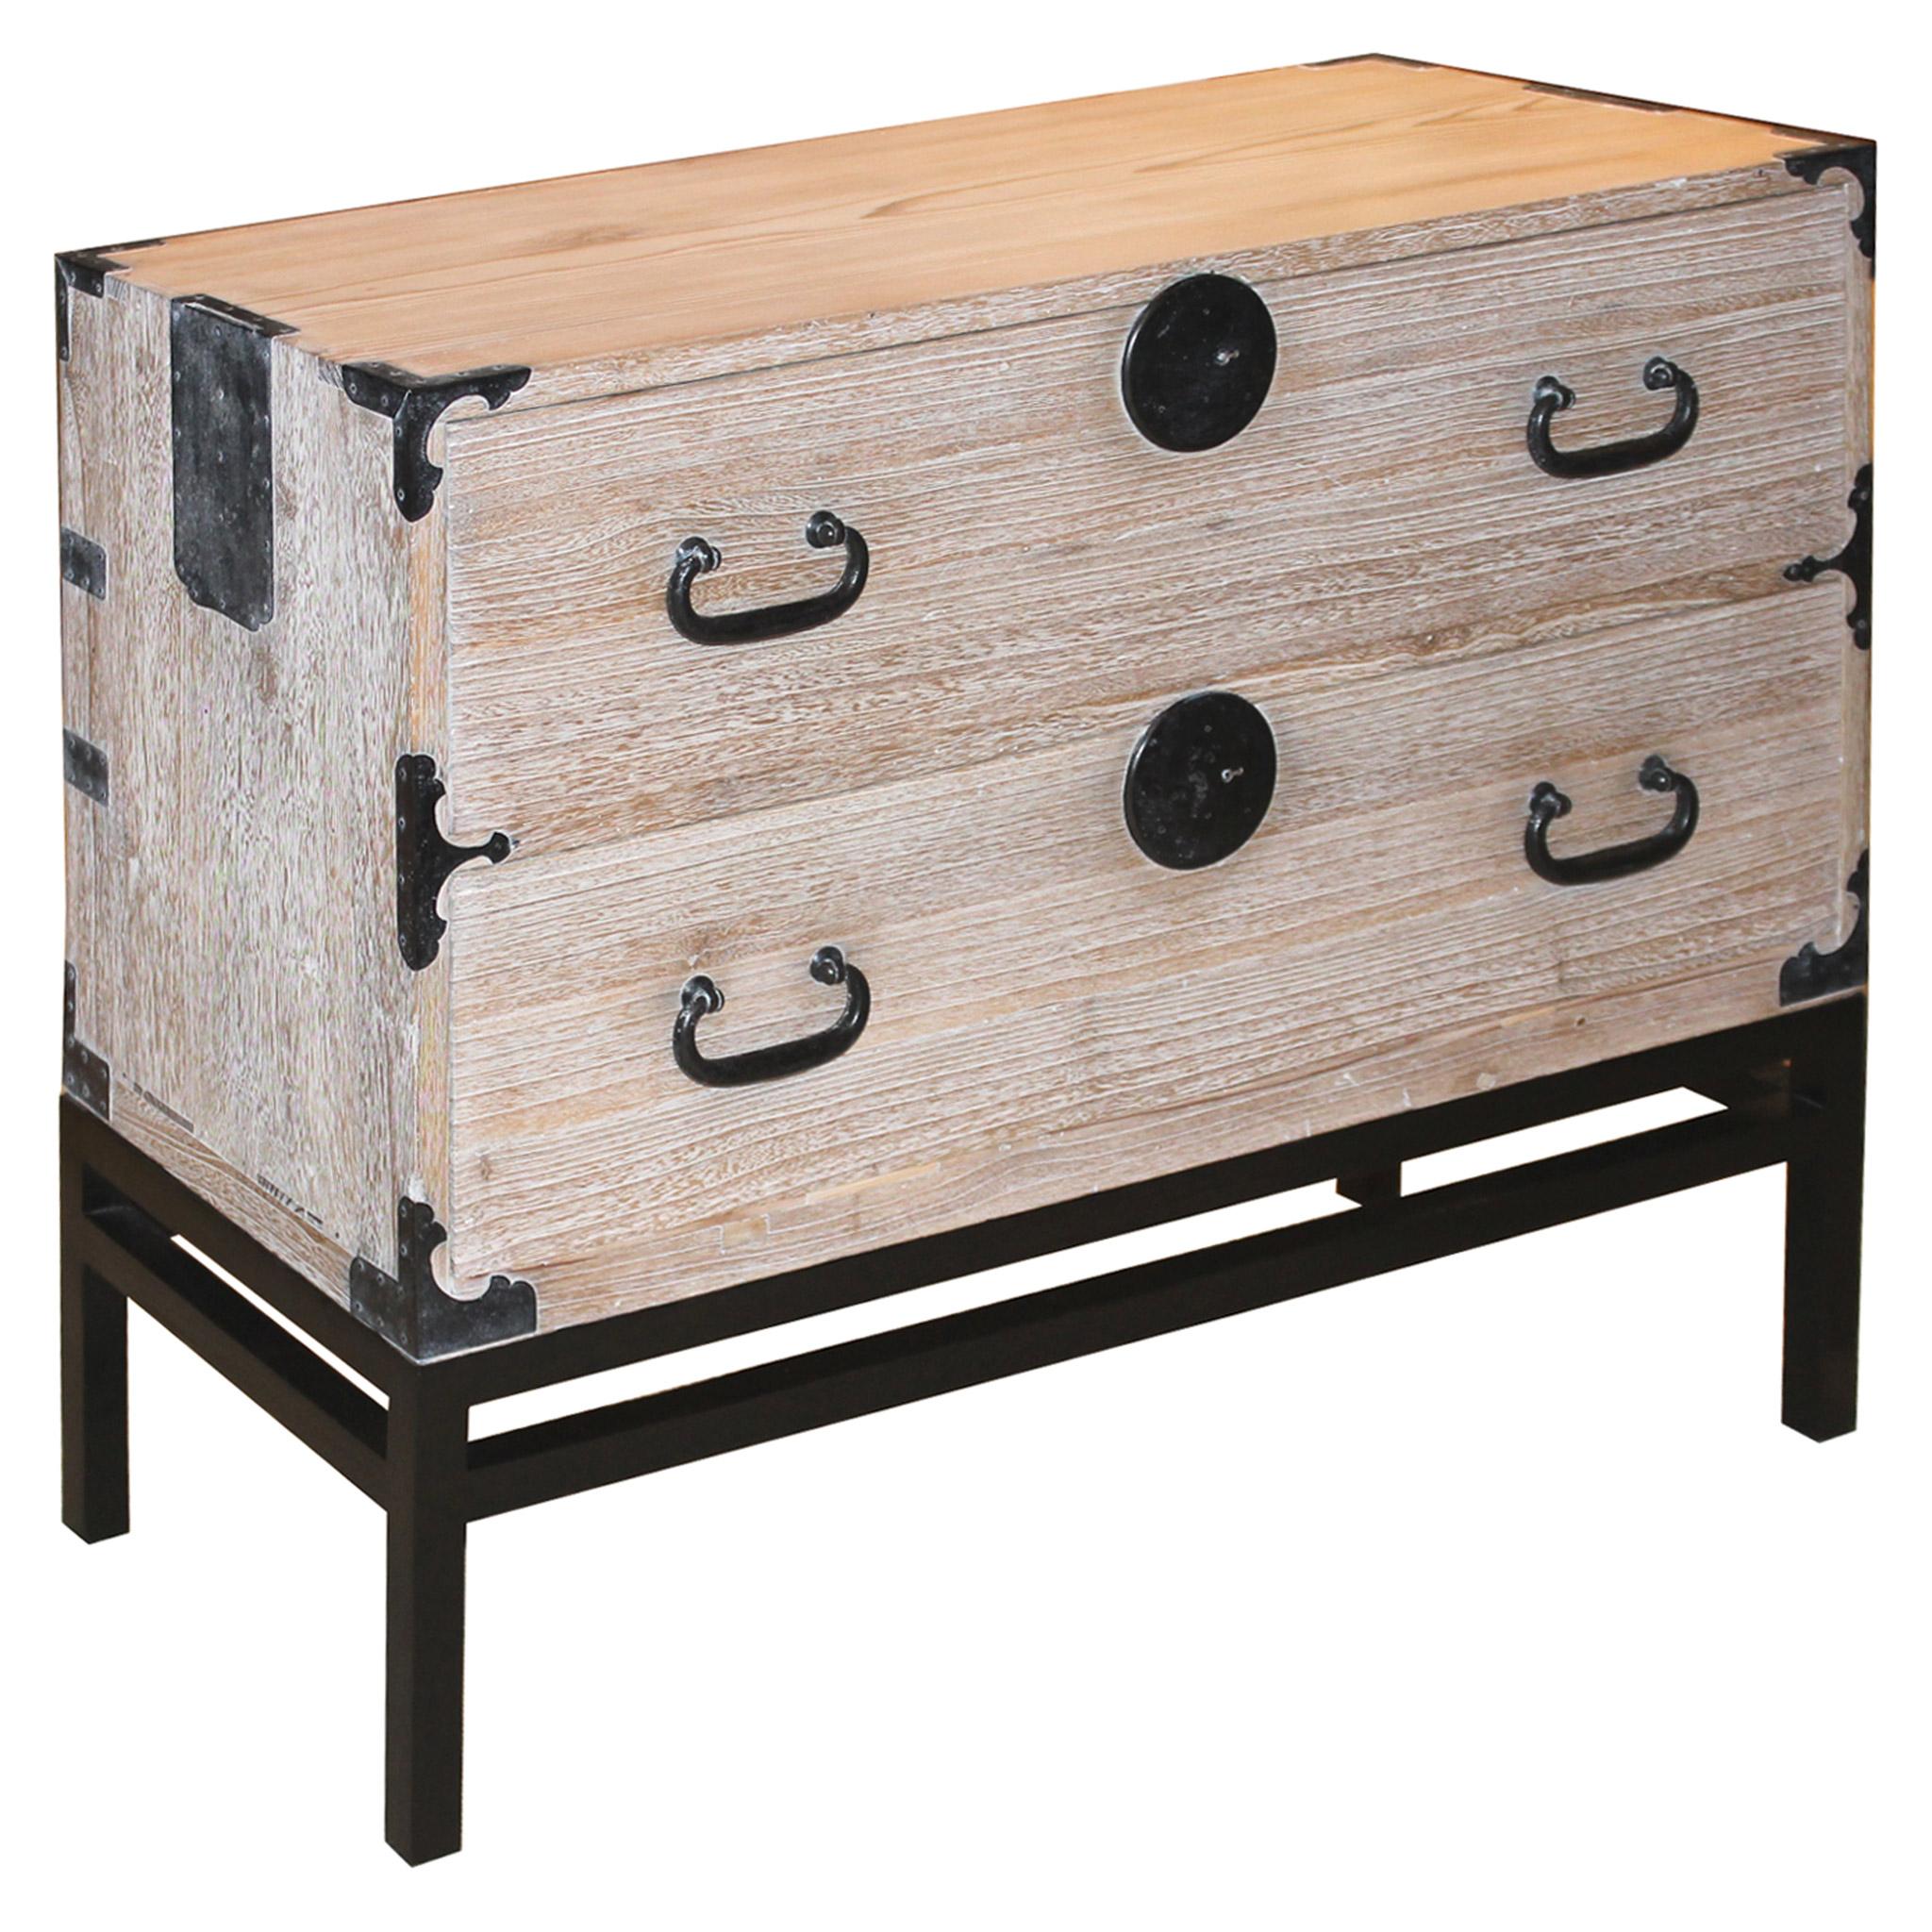 Japanese tansu has been transformed by white wax for a contemporary look for a modern home. Original the top portion of a 2 section clothing chest with original hand-forged iron hardware. Now on a custom made black lacquer wood stand. Use as a